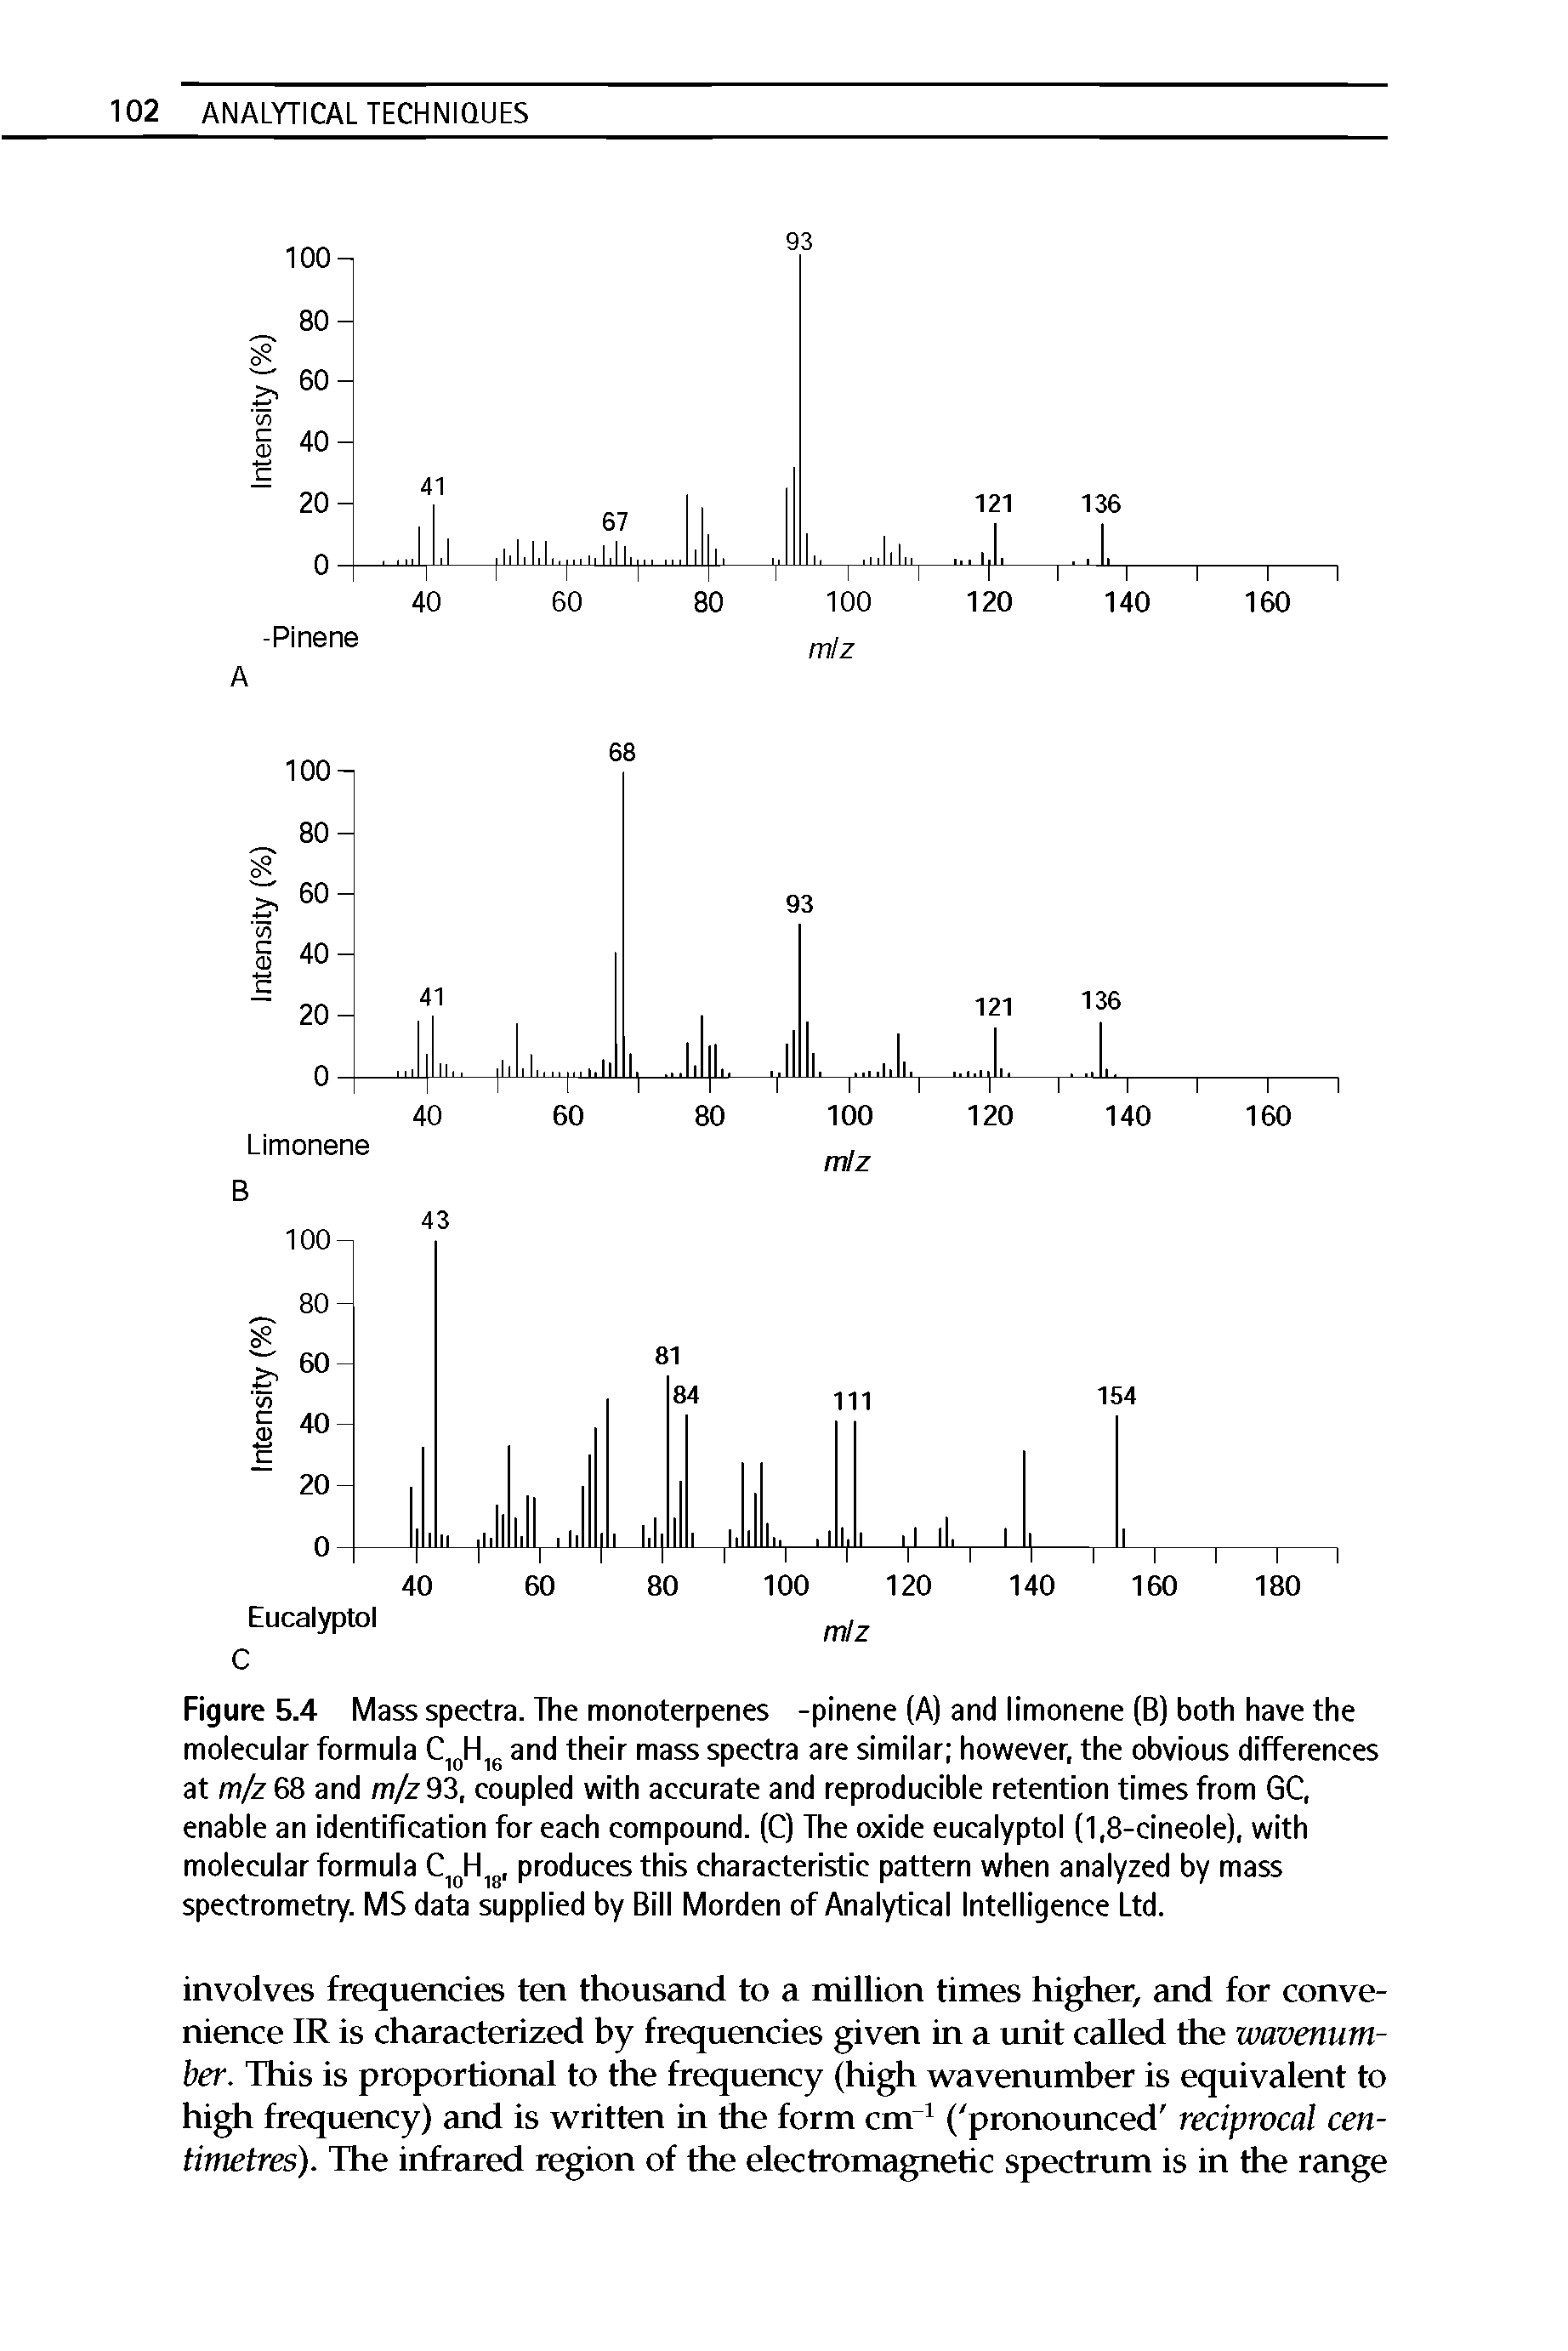 Figure 5.4 Mass spectra. The monoterpenes -pinene (A) and limonene (B) both have the molecular formula C10H16 and their mass spectra are similar however, the obvious differences at m/z 68 and m/z 93, coupled with accurate and reproducible retention times from GC, enable an identification for each compound. (C) The oxide eucalyptol (1,8-cineole), with molecular formula C H, produces this characteristic pattern when analyzed by mass spectrometry. MS data supplied by Bill Morden of Analytical Intelligence Ltd.